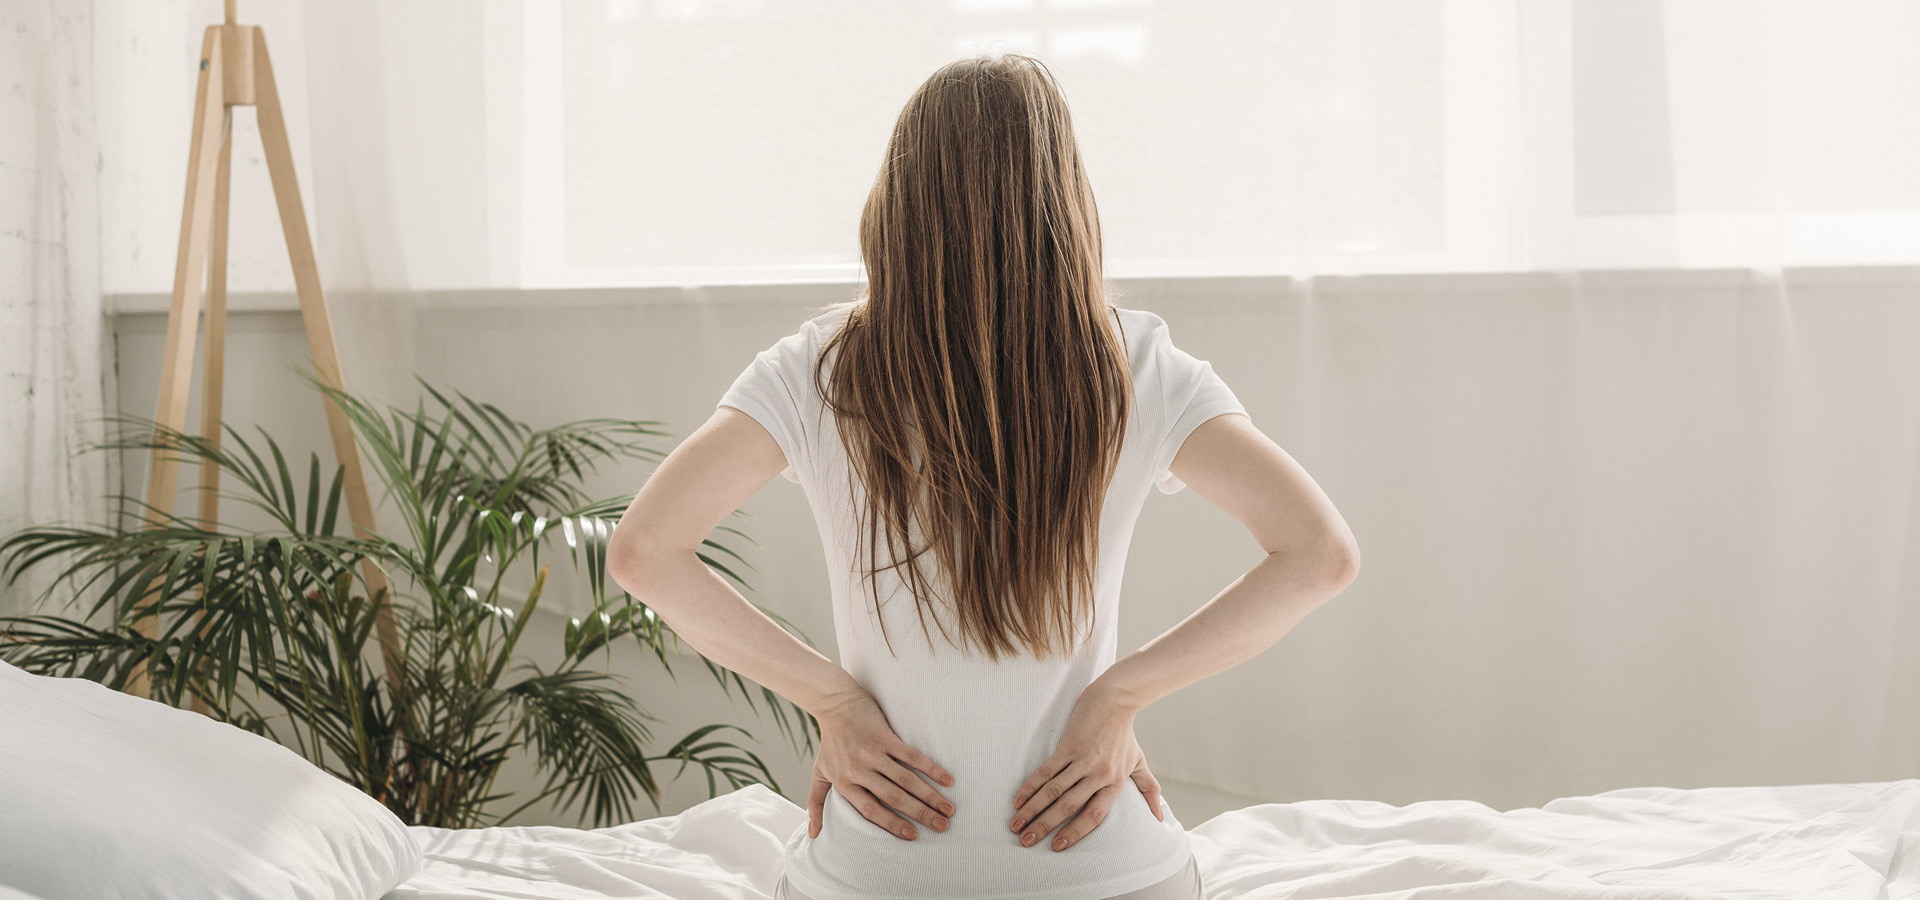 back view of young woman sitting on bed and suffering from back pain